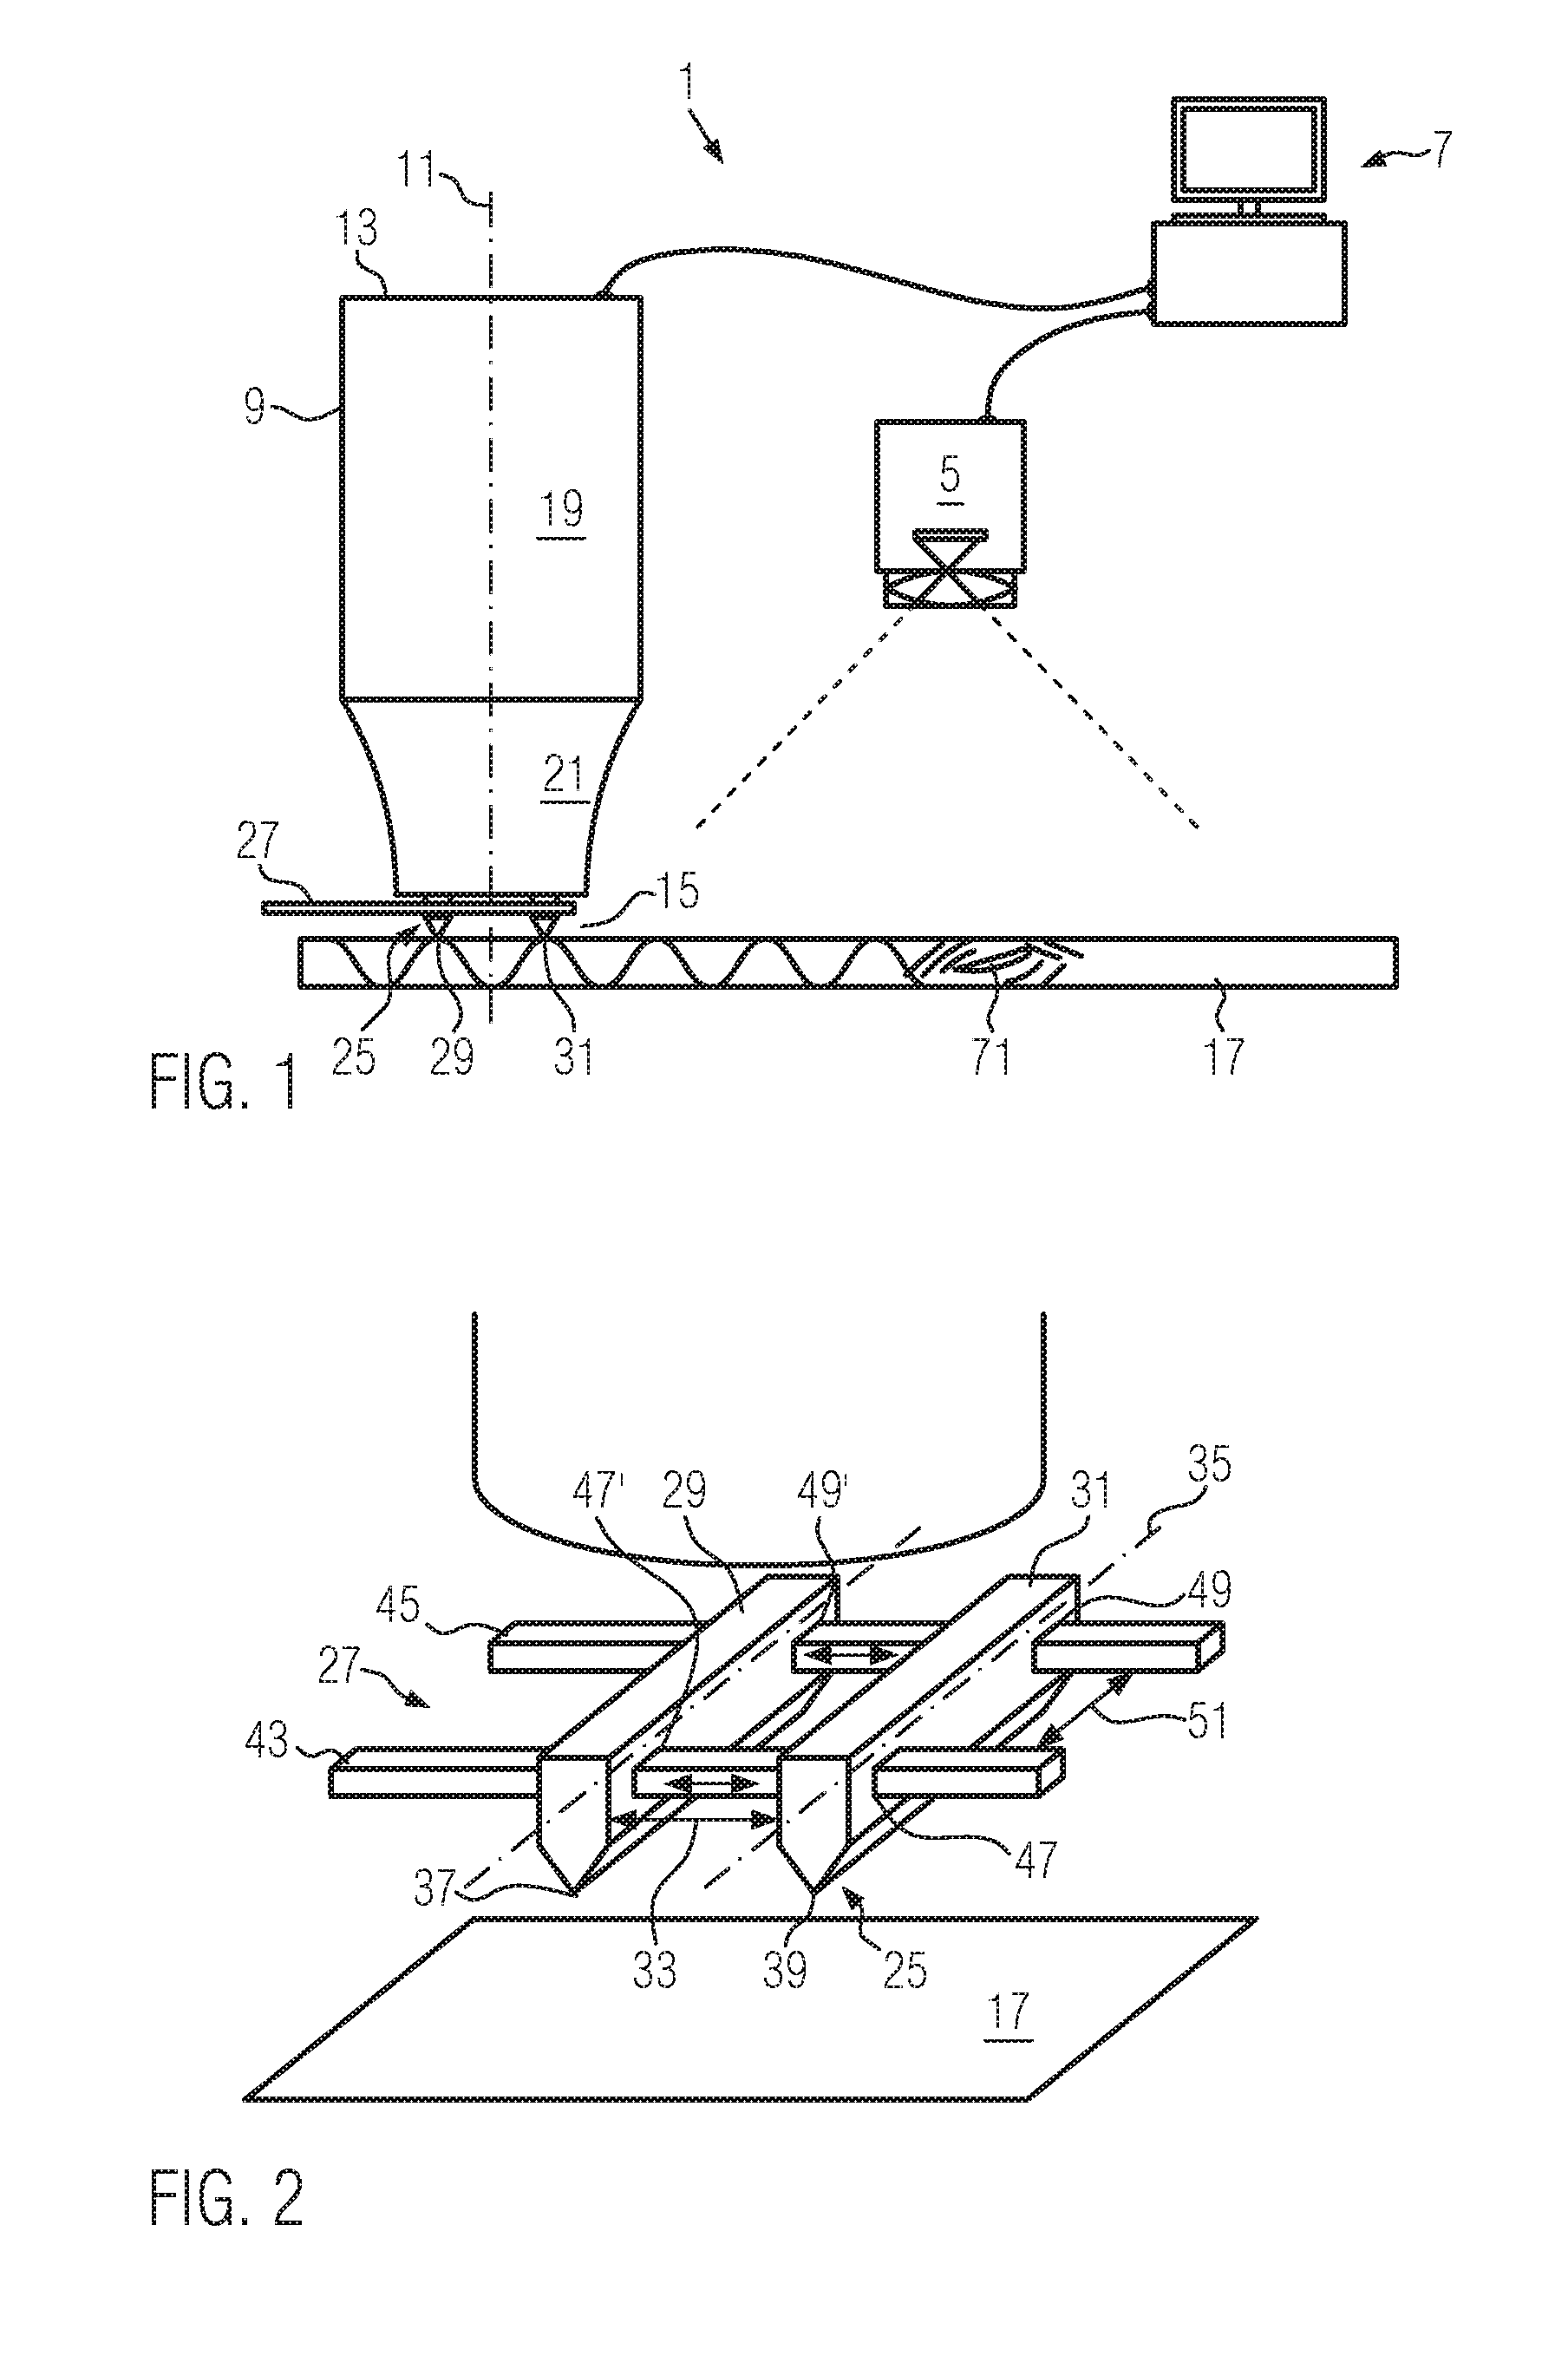 System for non-destructive inspection of structural components